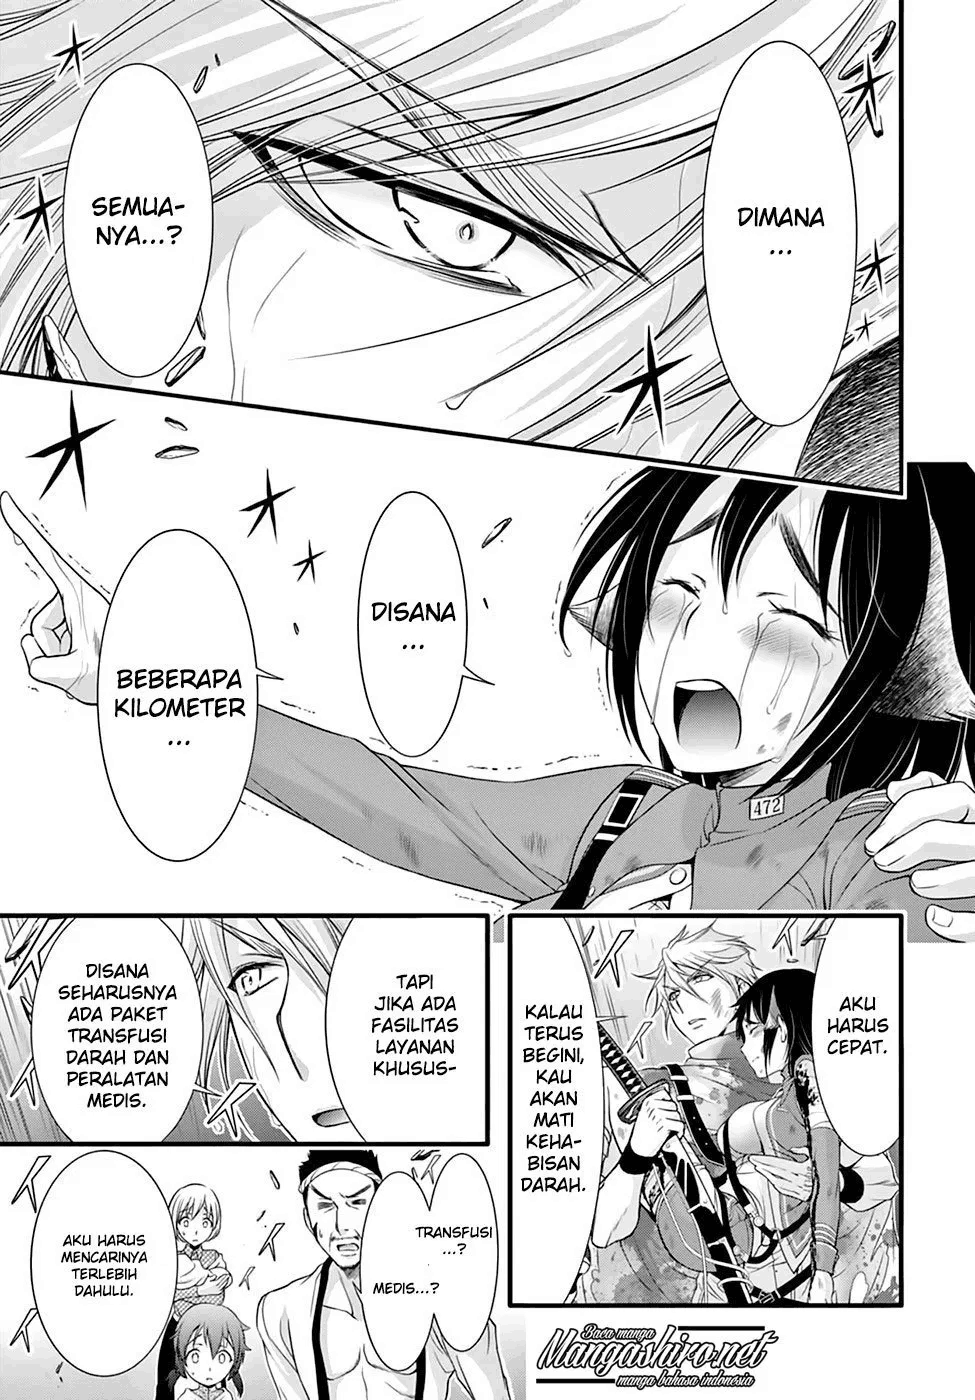 Plunderer Chapter 34 Bahasa Indonesia